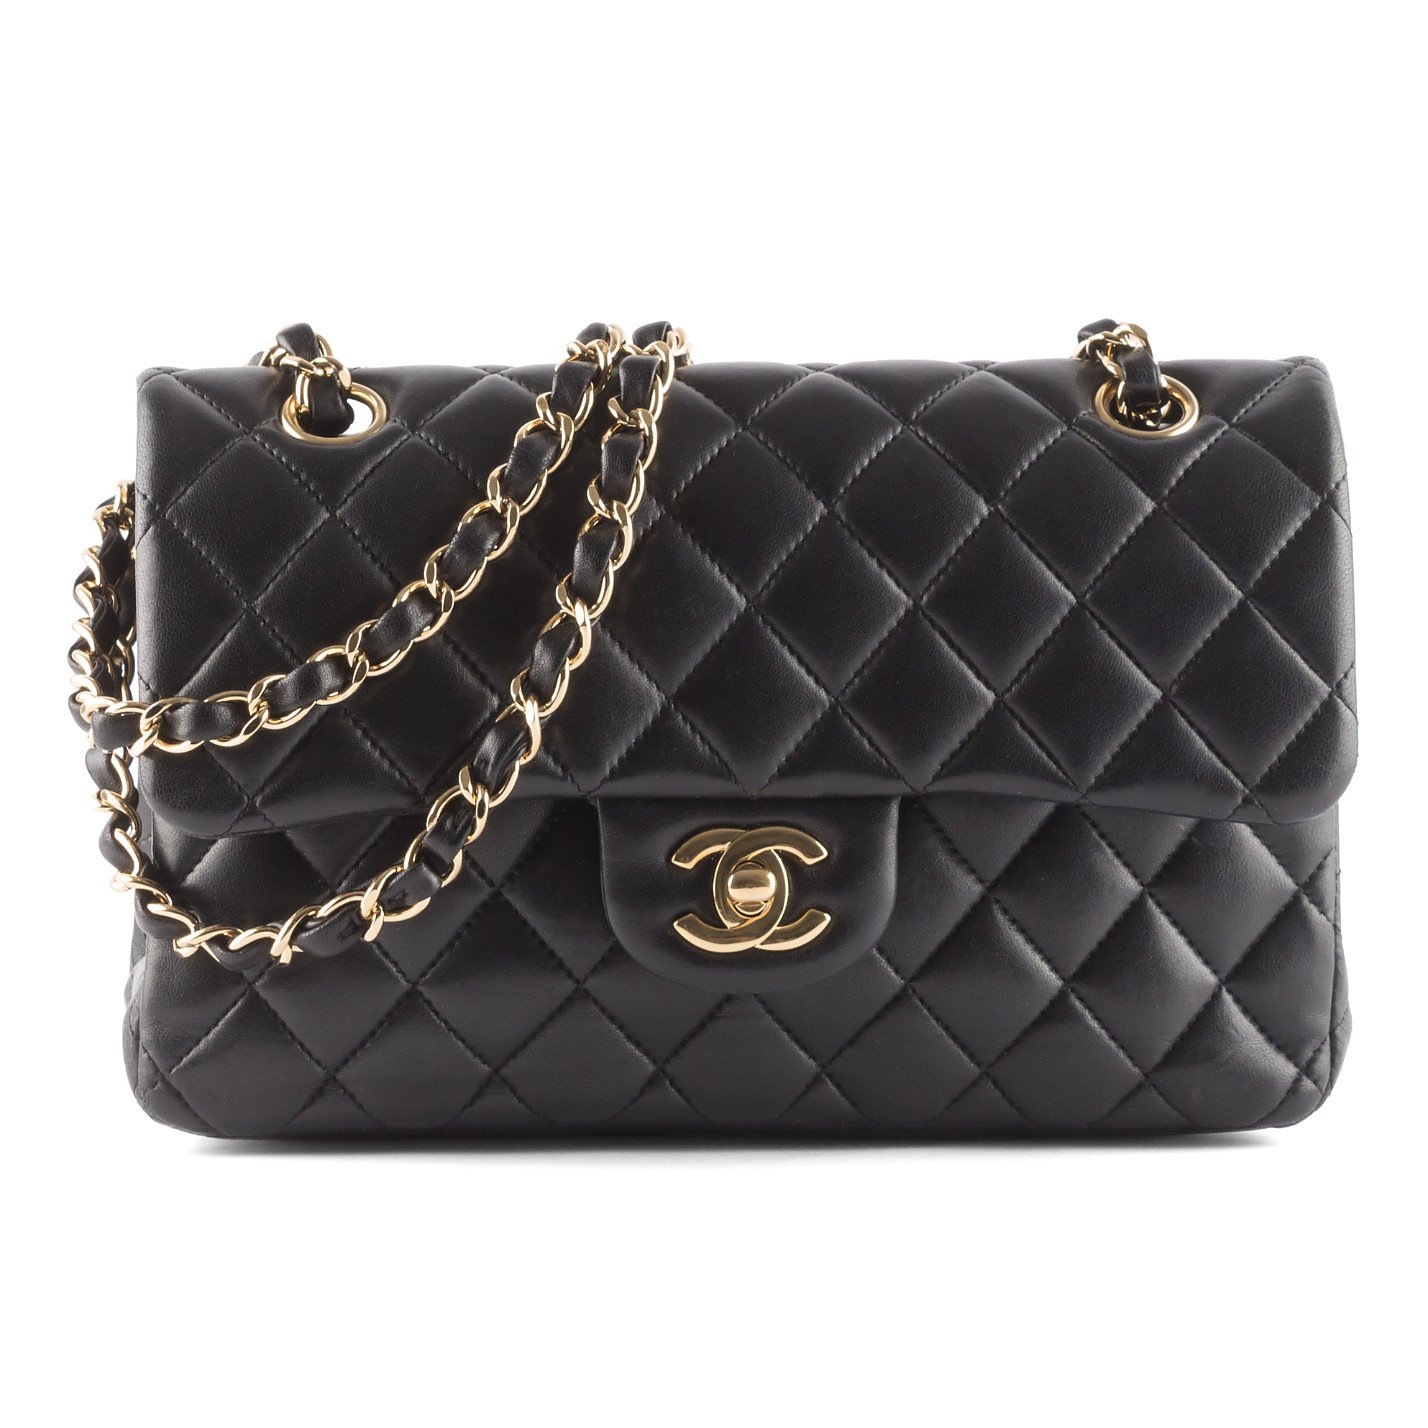 Rent or Buy CHANEL Flap Bag from MyWardrobeHQ.com